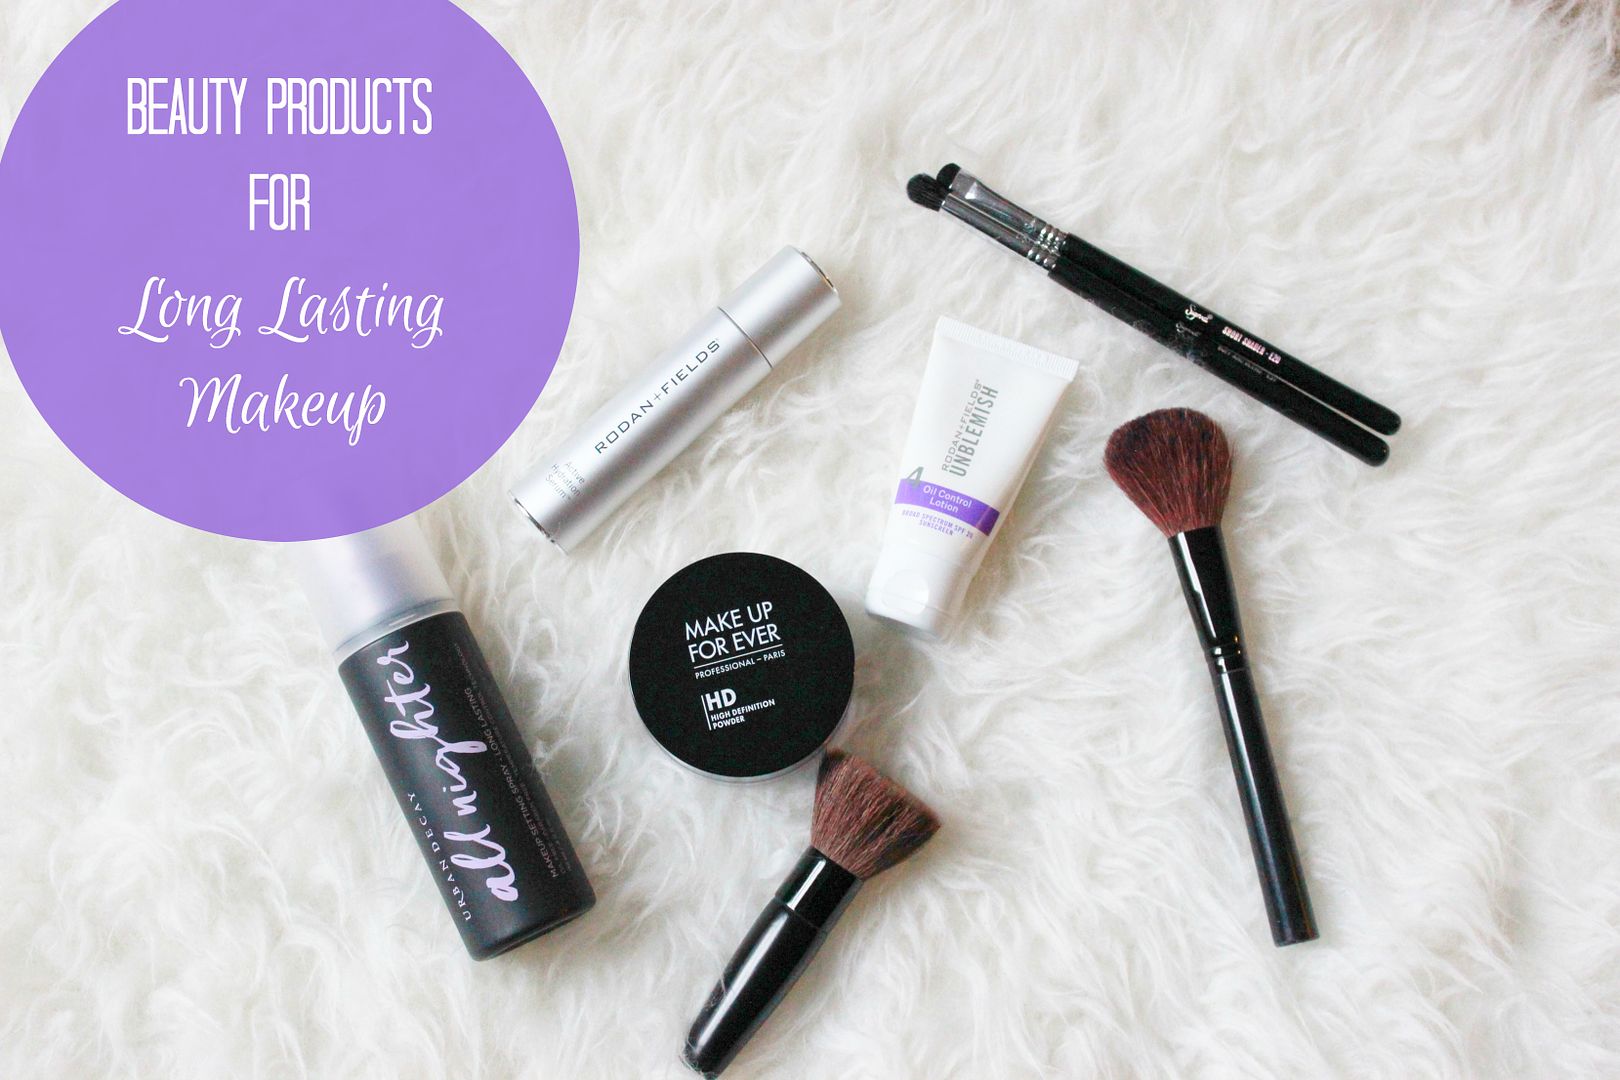 Beauty Products for Long Lasting Makeup